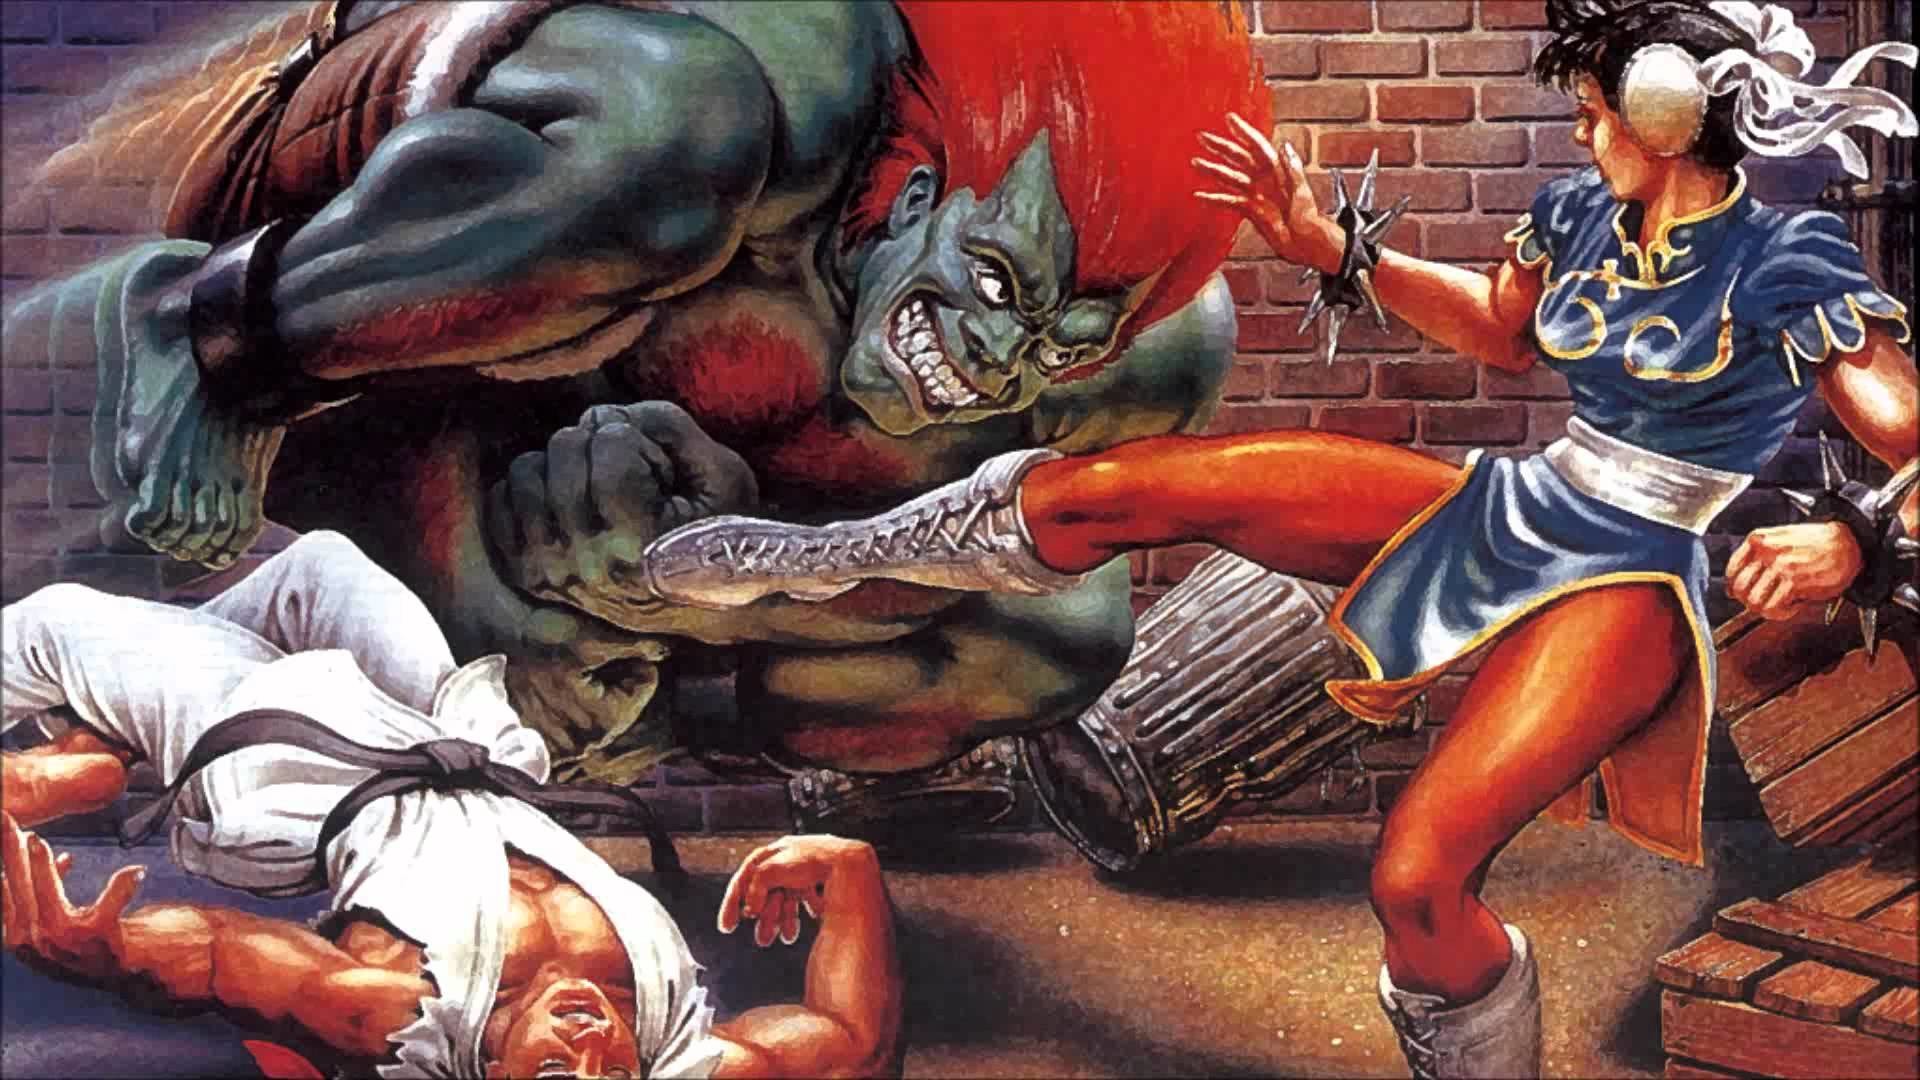 1920x1080 6 Street Fighter II: The World Warrior HD Wallpapers | Backgrounds .